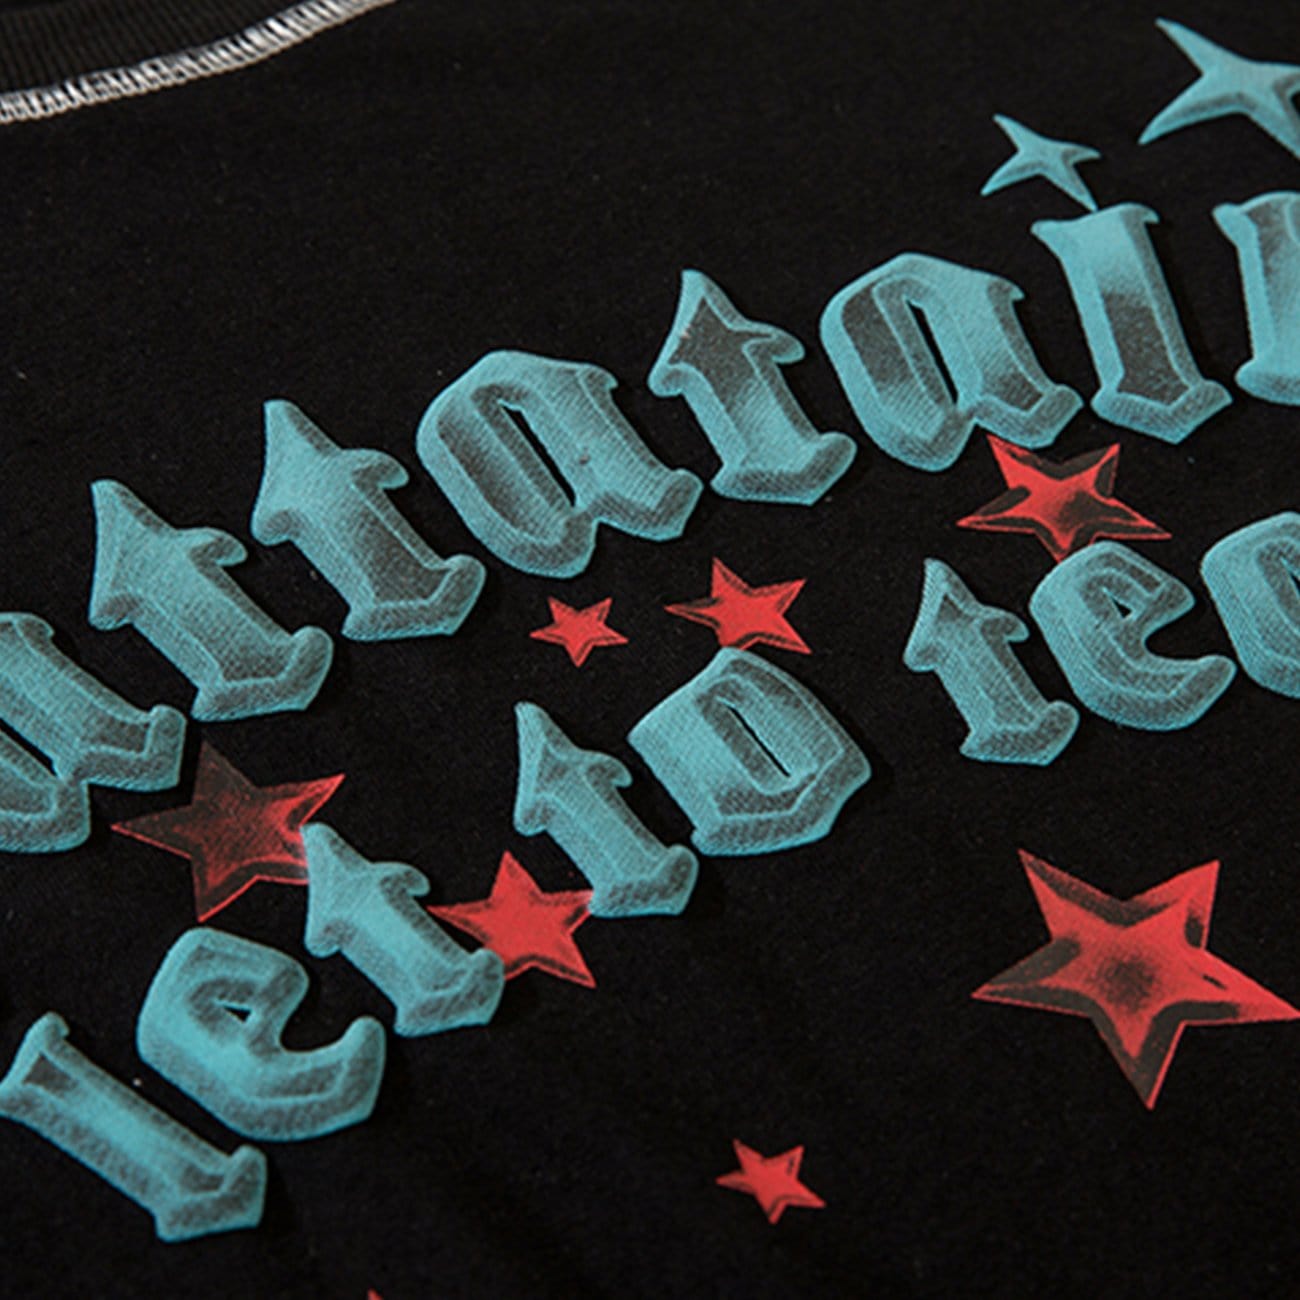 Letter Stars Graphic Tee Streetwear Brand Techwear Combat Tactical YUGEN THEORY